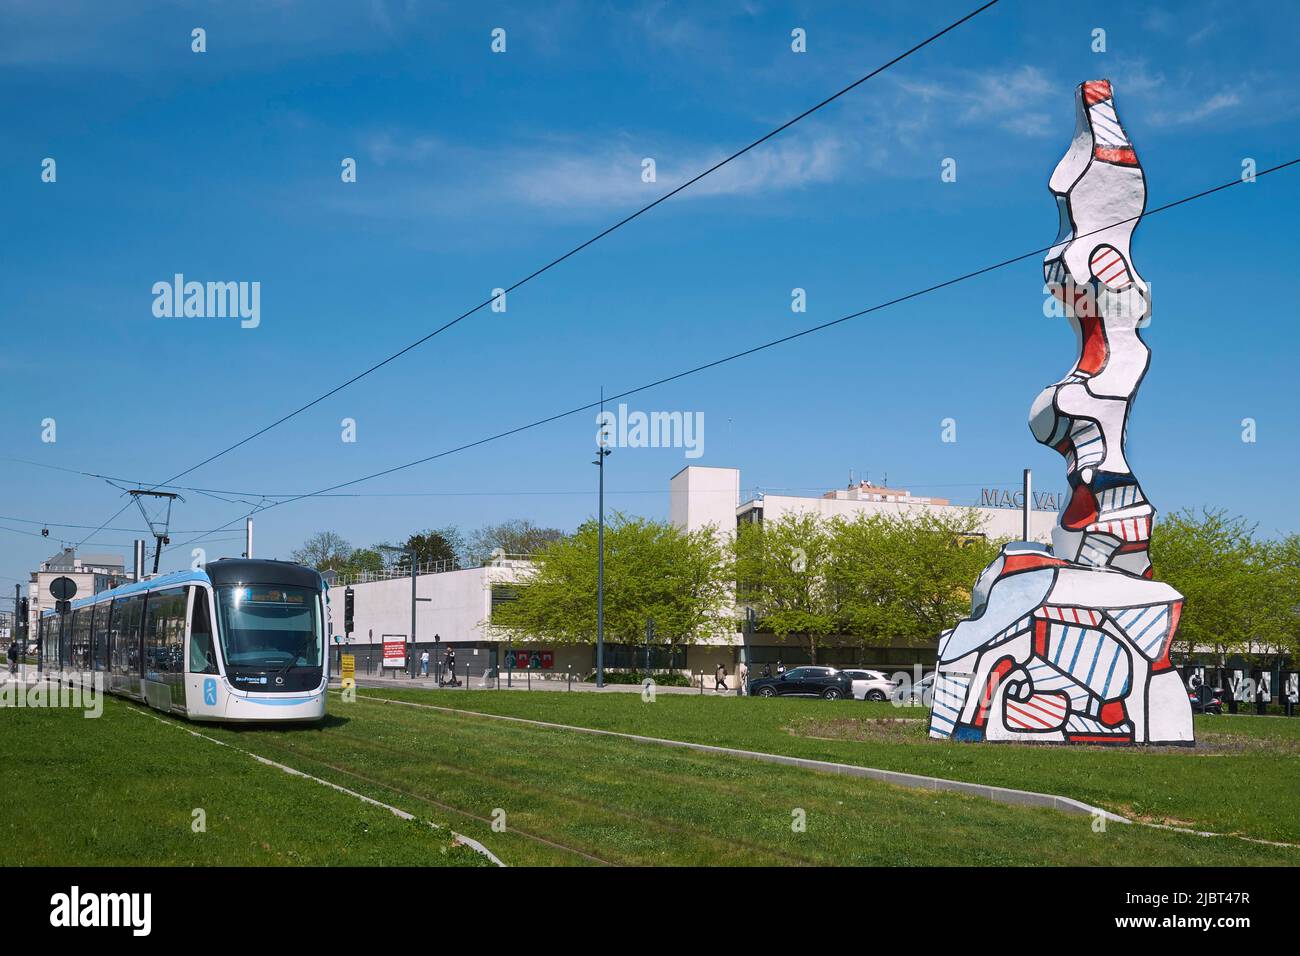 France, Val de Marne, Vitry sur Seine, Liberation crossroads, monumental sculpture by Dubuffet entitled Chaufferie avec cheminee, tramway station MAC VAL museum Stock Photo